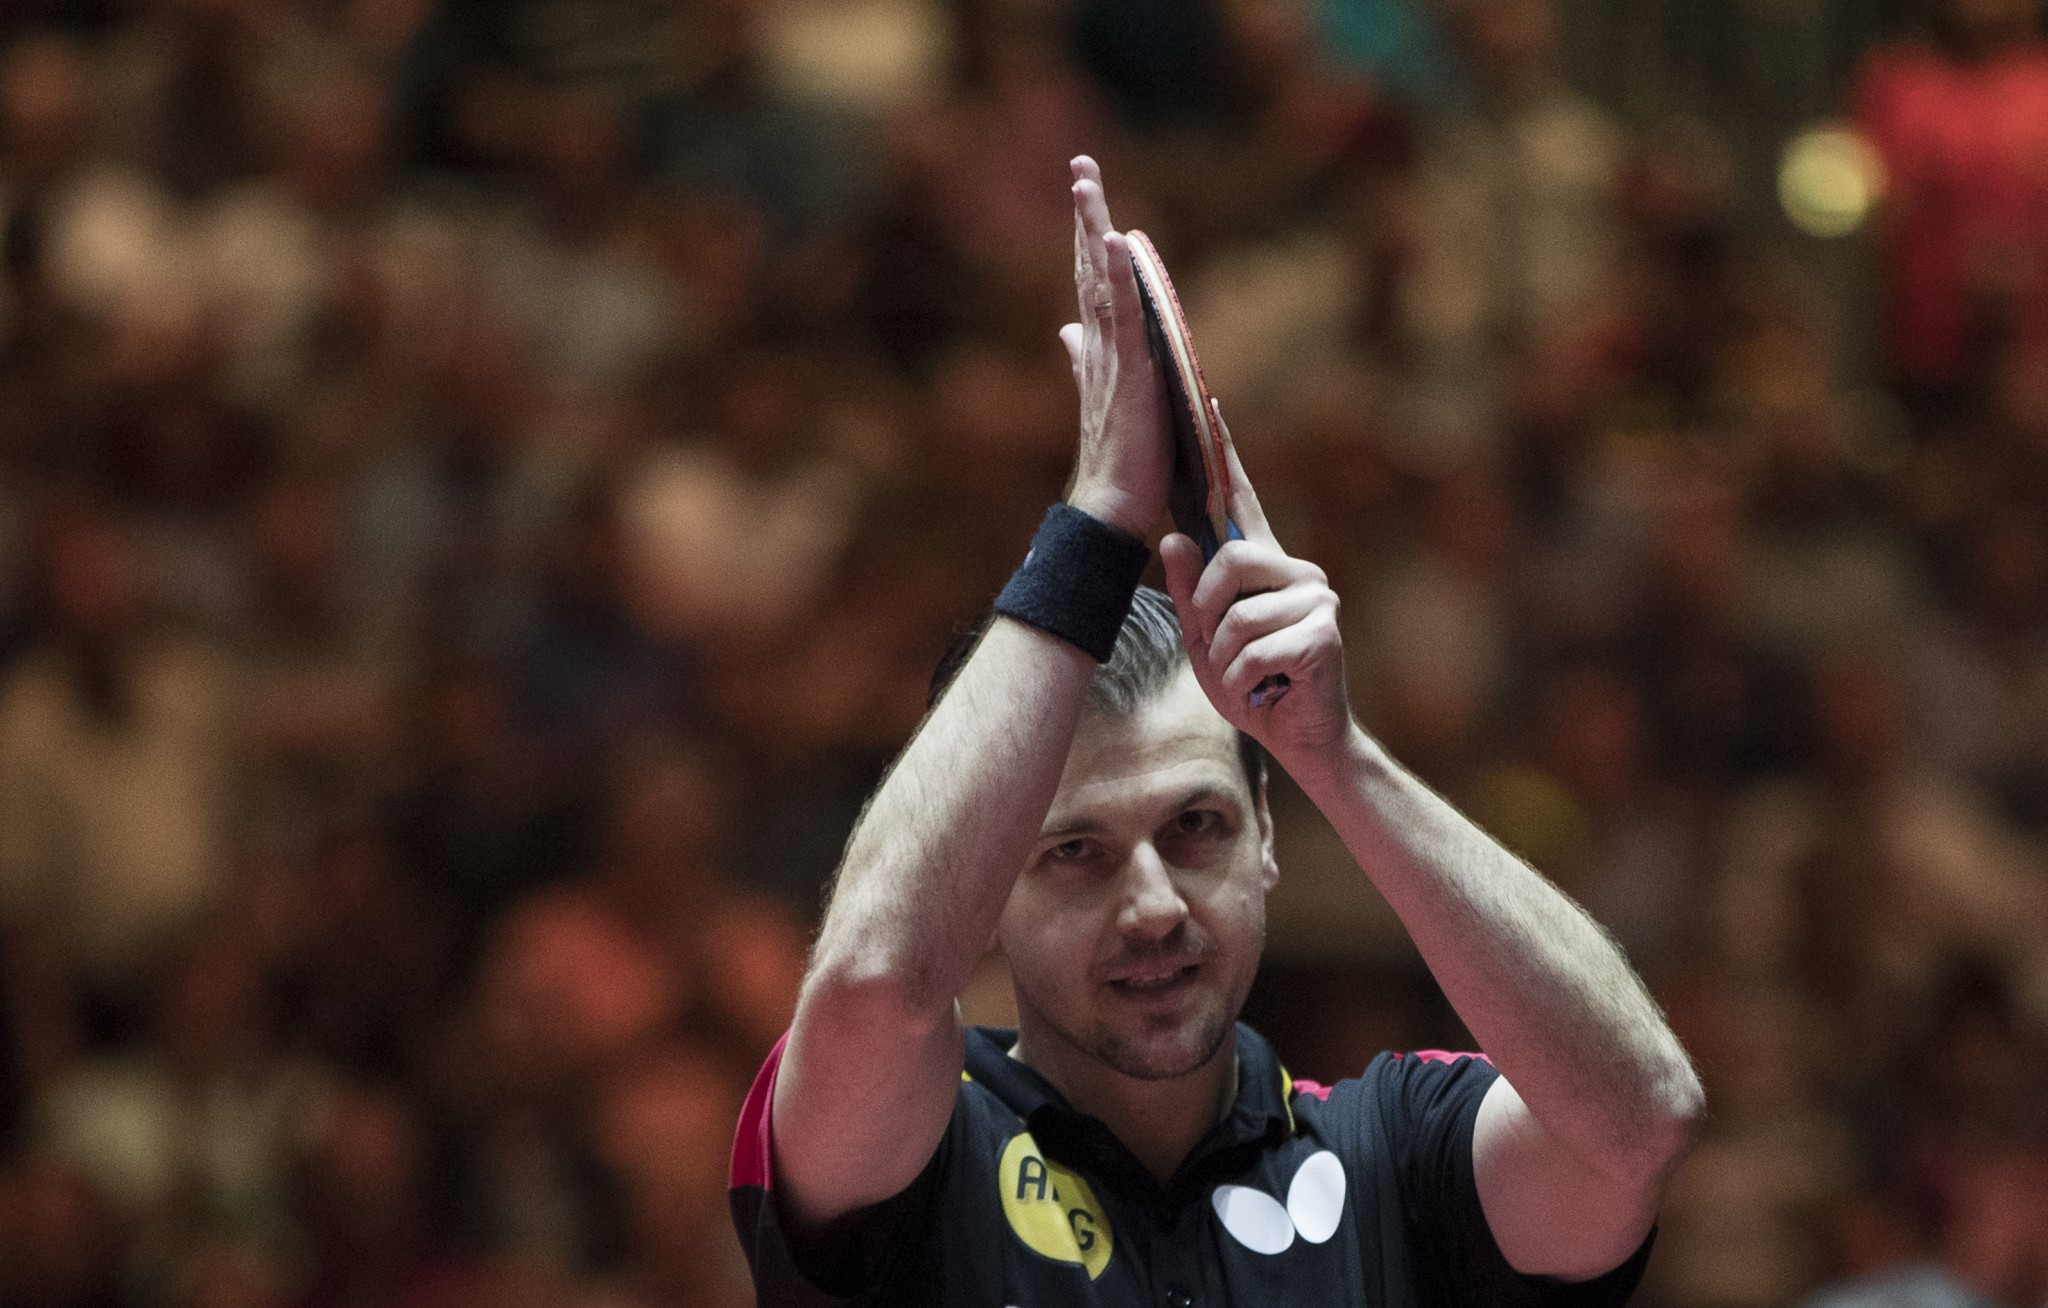 Timo Boll was another comfortable winner for Germany ©Getty Images